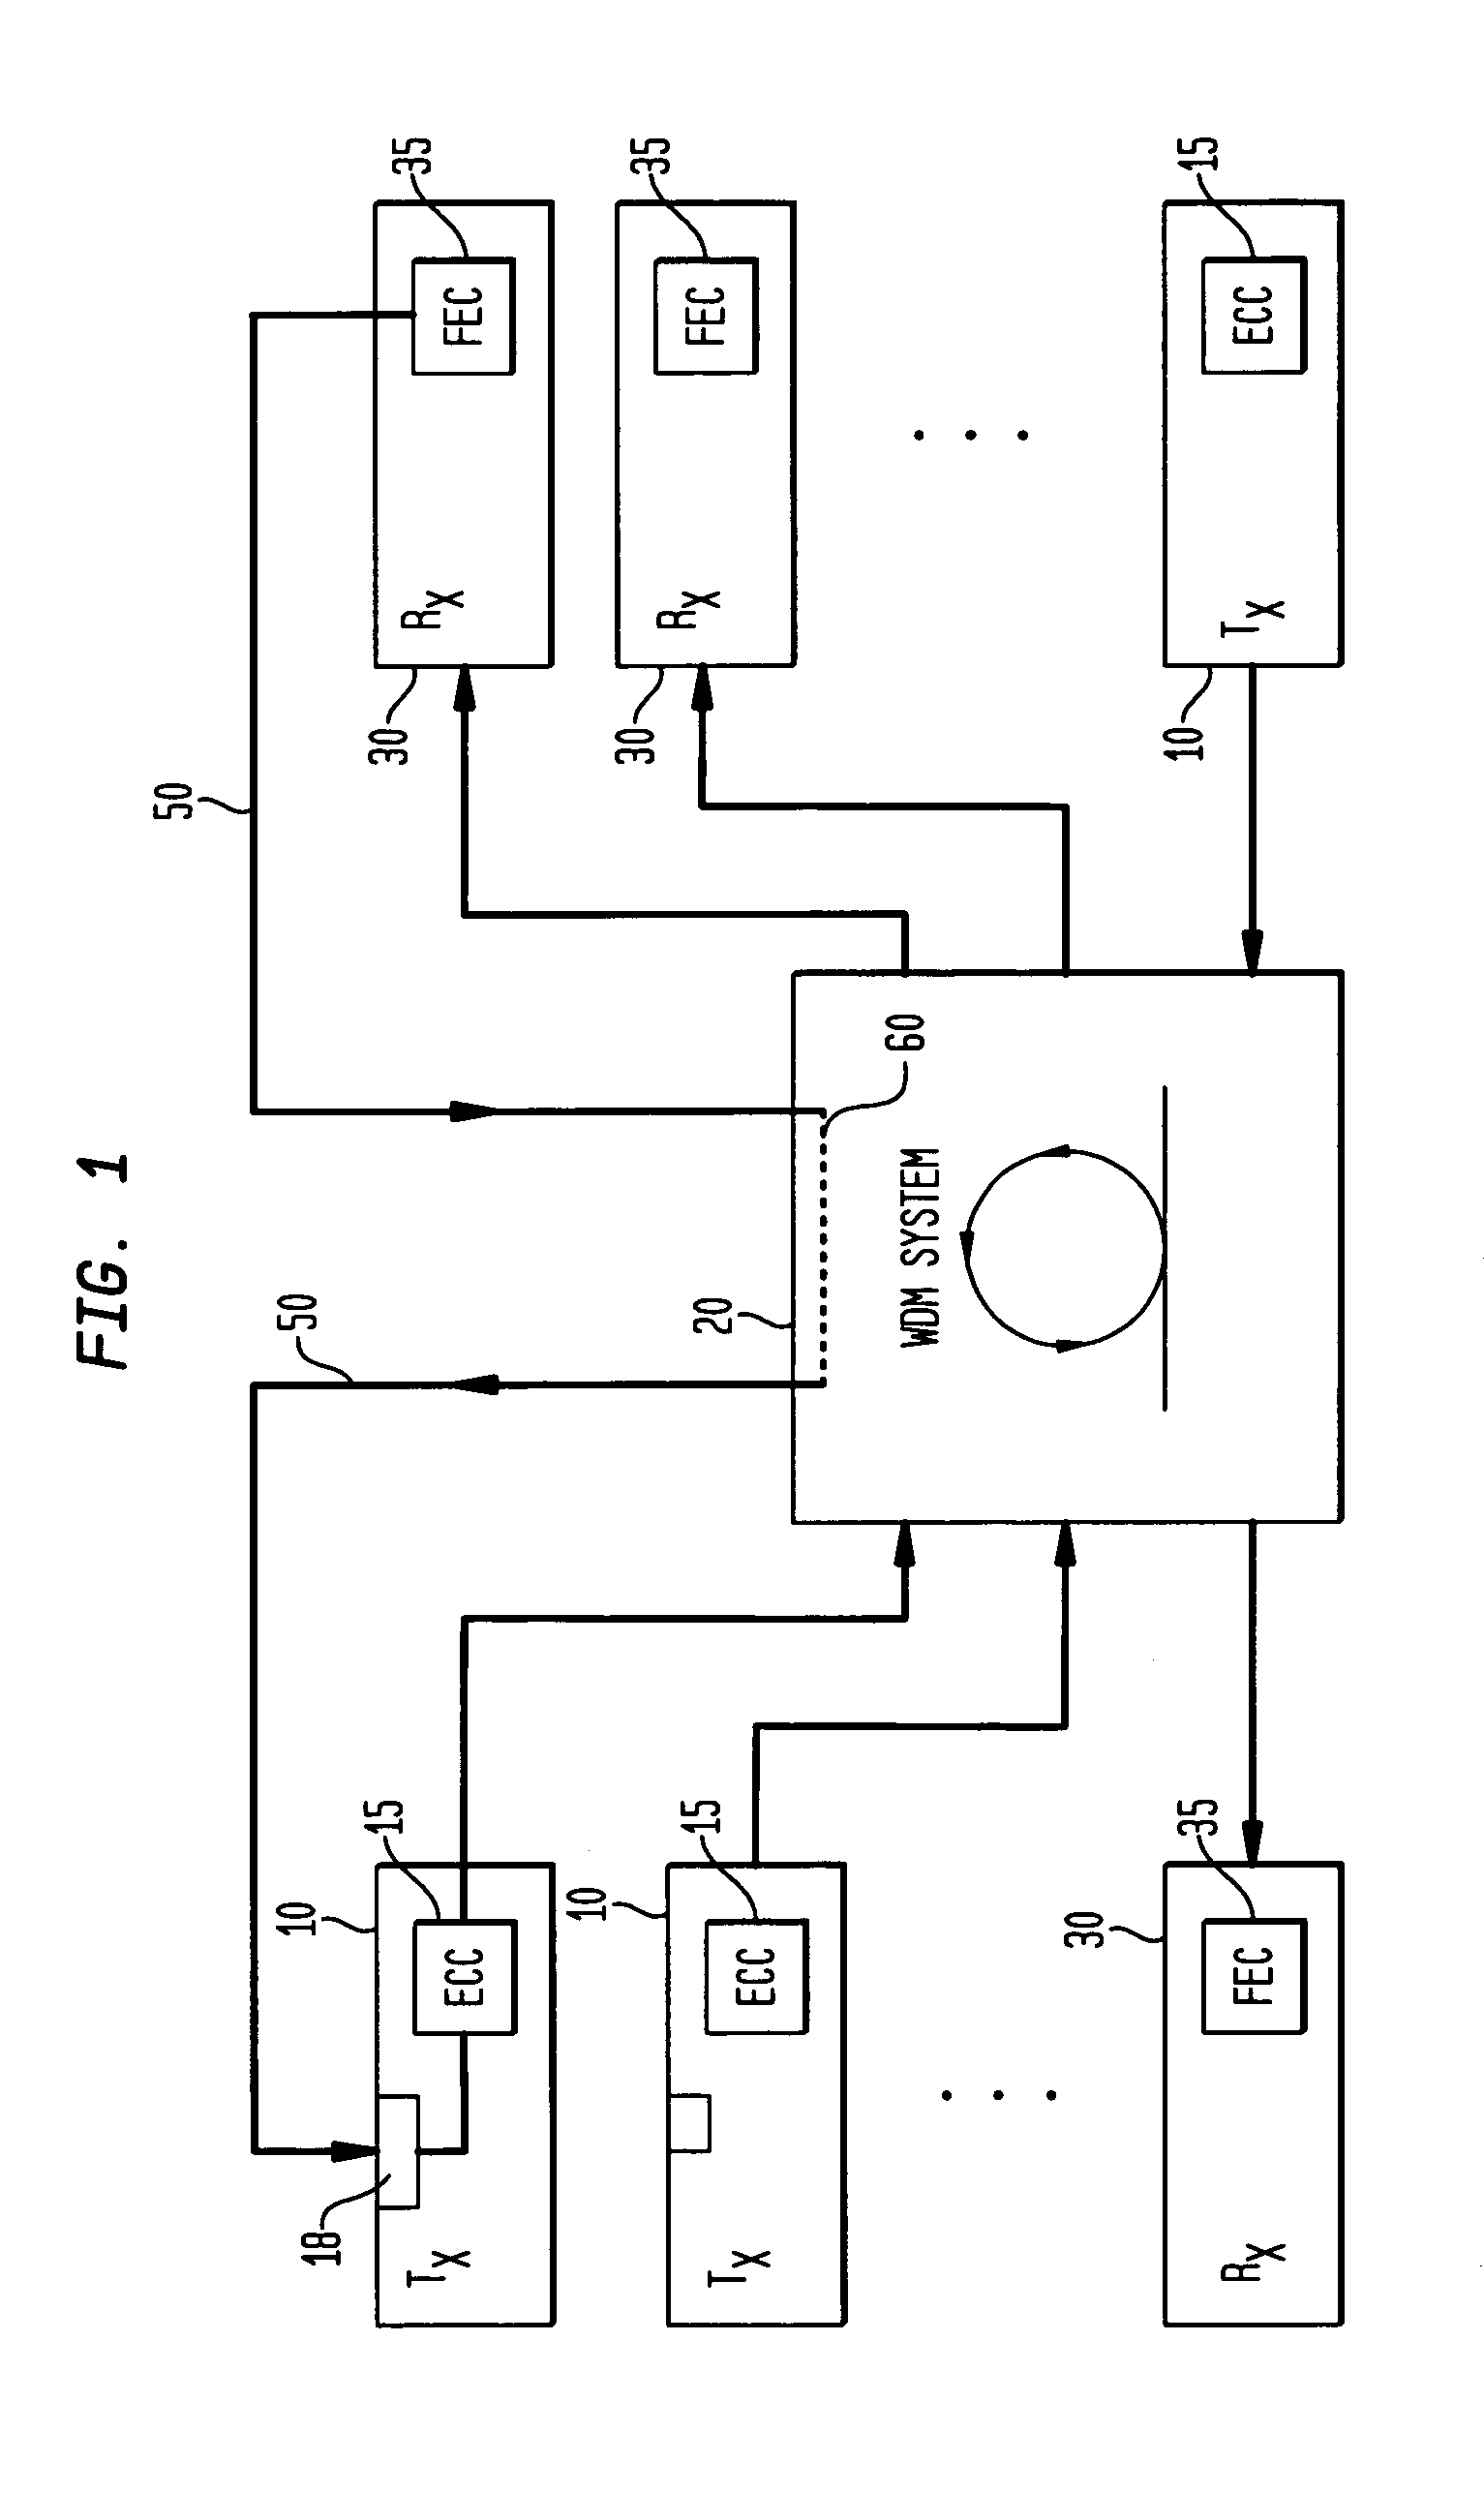 Method and device for evaluating and improving the quality of transmission of a telecommunications signal through an optical fiber